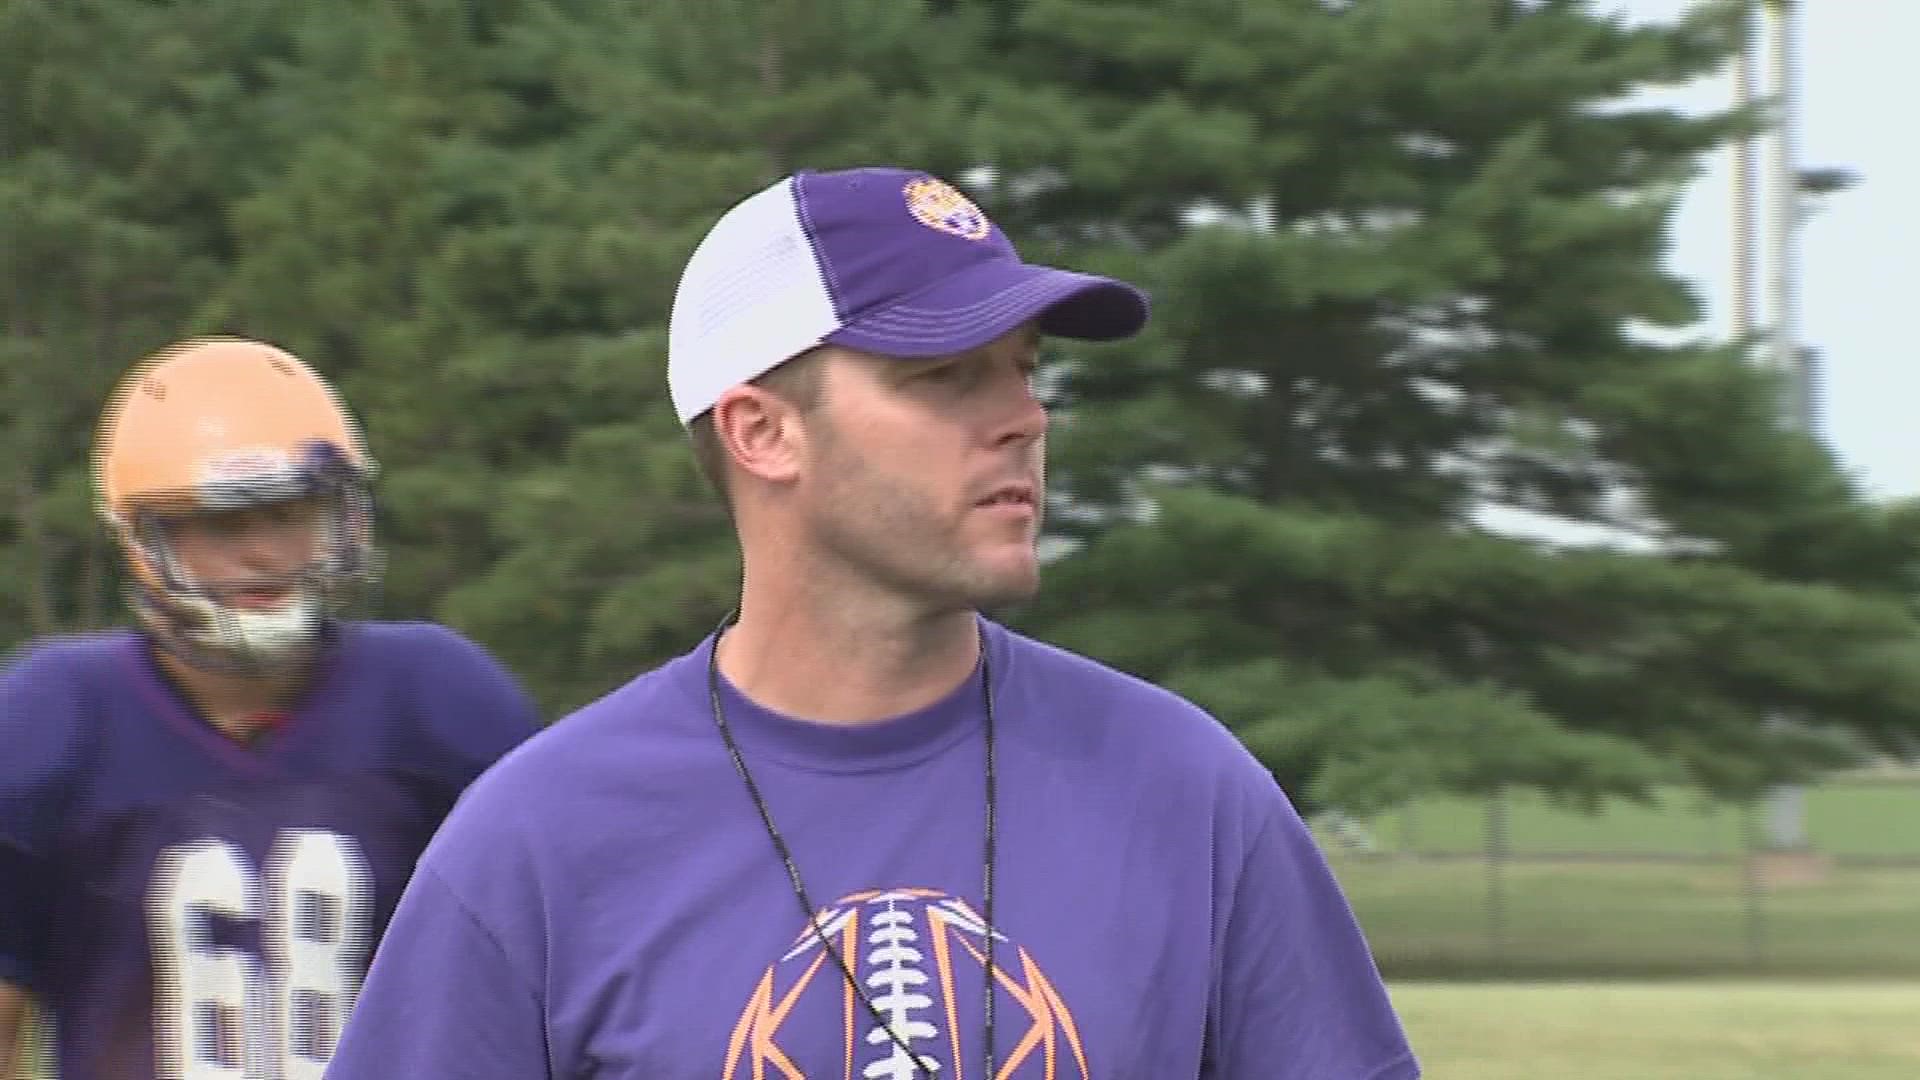 Sherrard is coming off a 4-2 spring season. The have a new head coach in Brandon Johnston. He hopes to continue the winning ways for the Tigers.